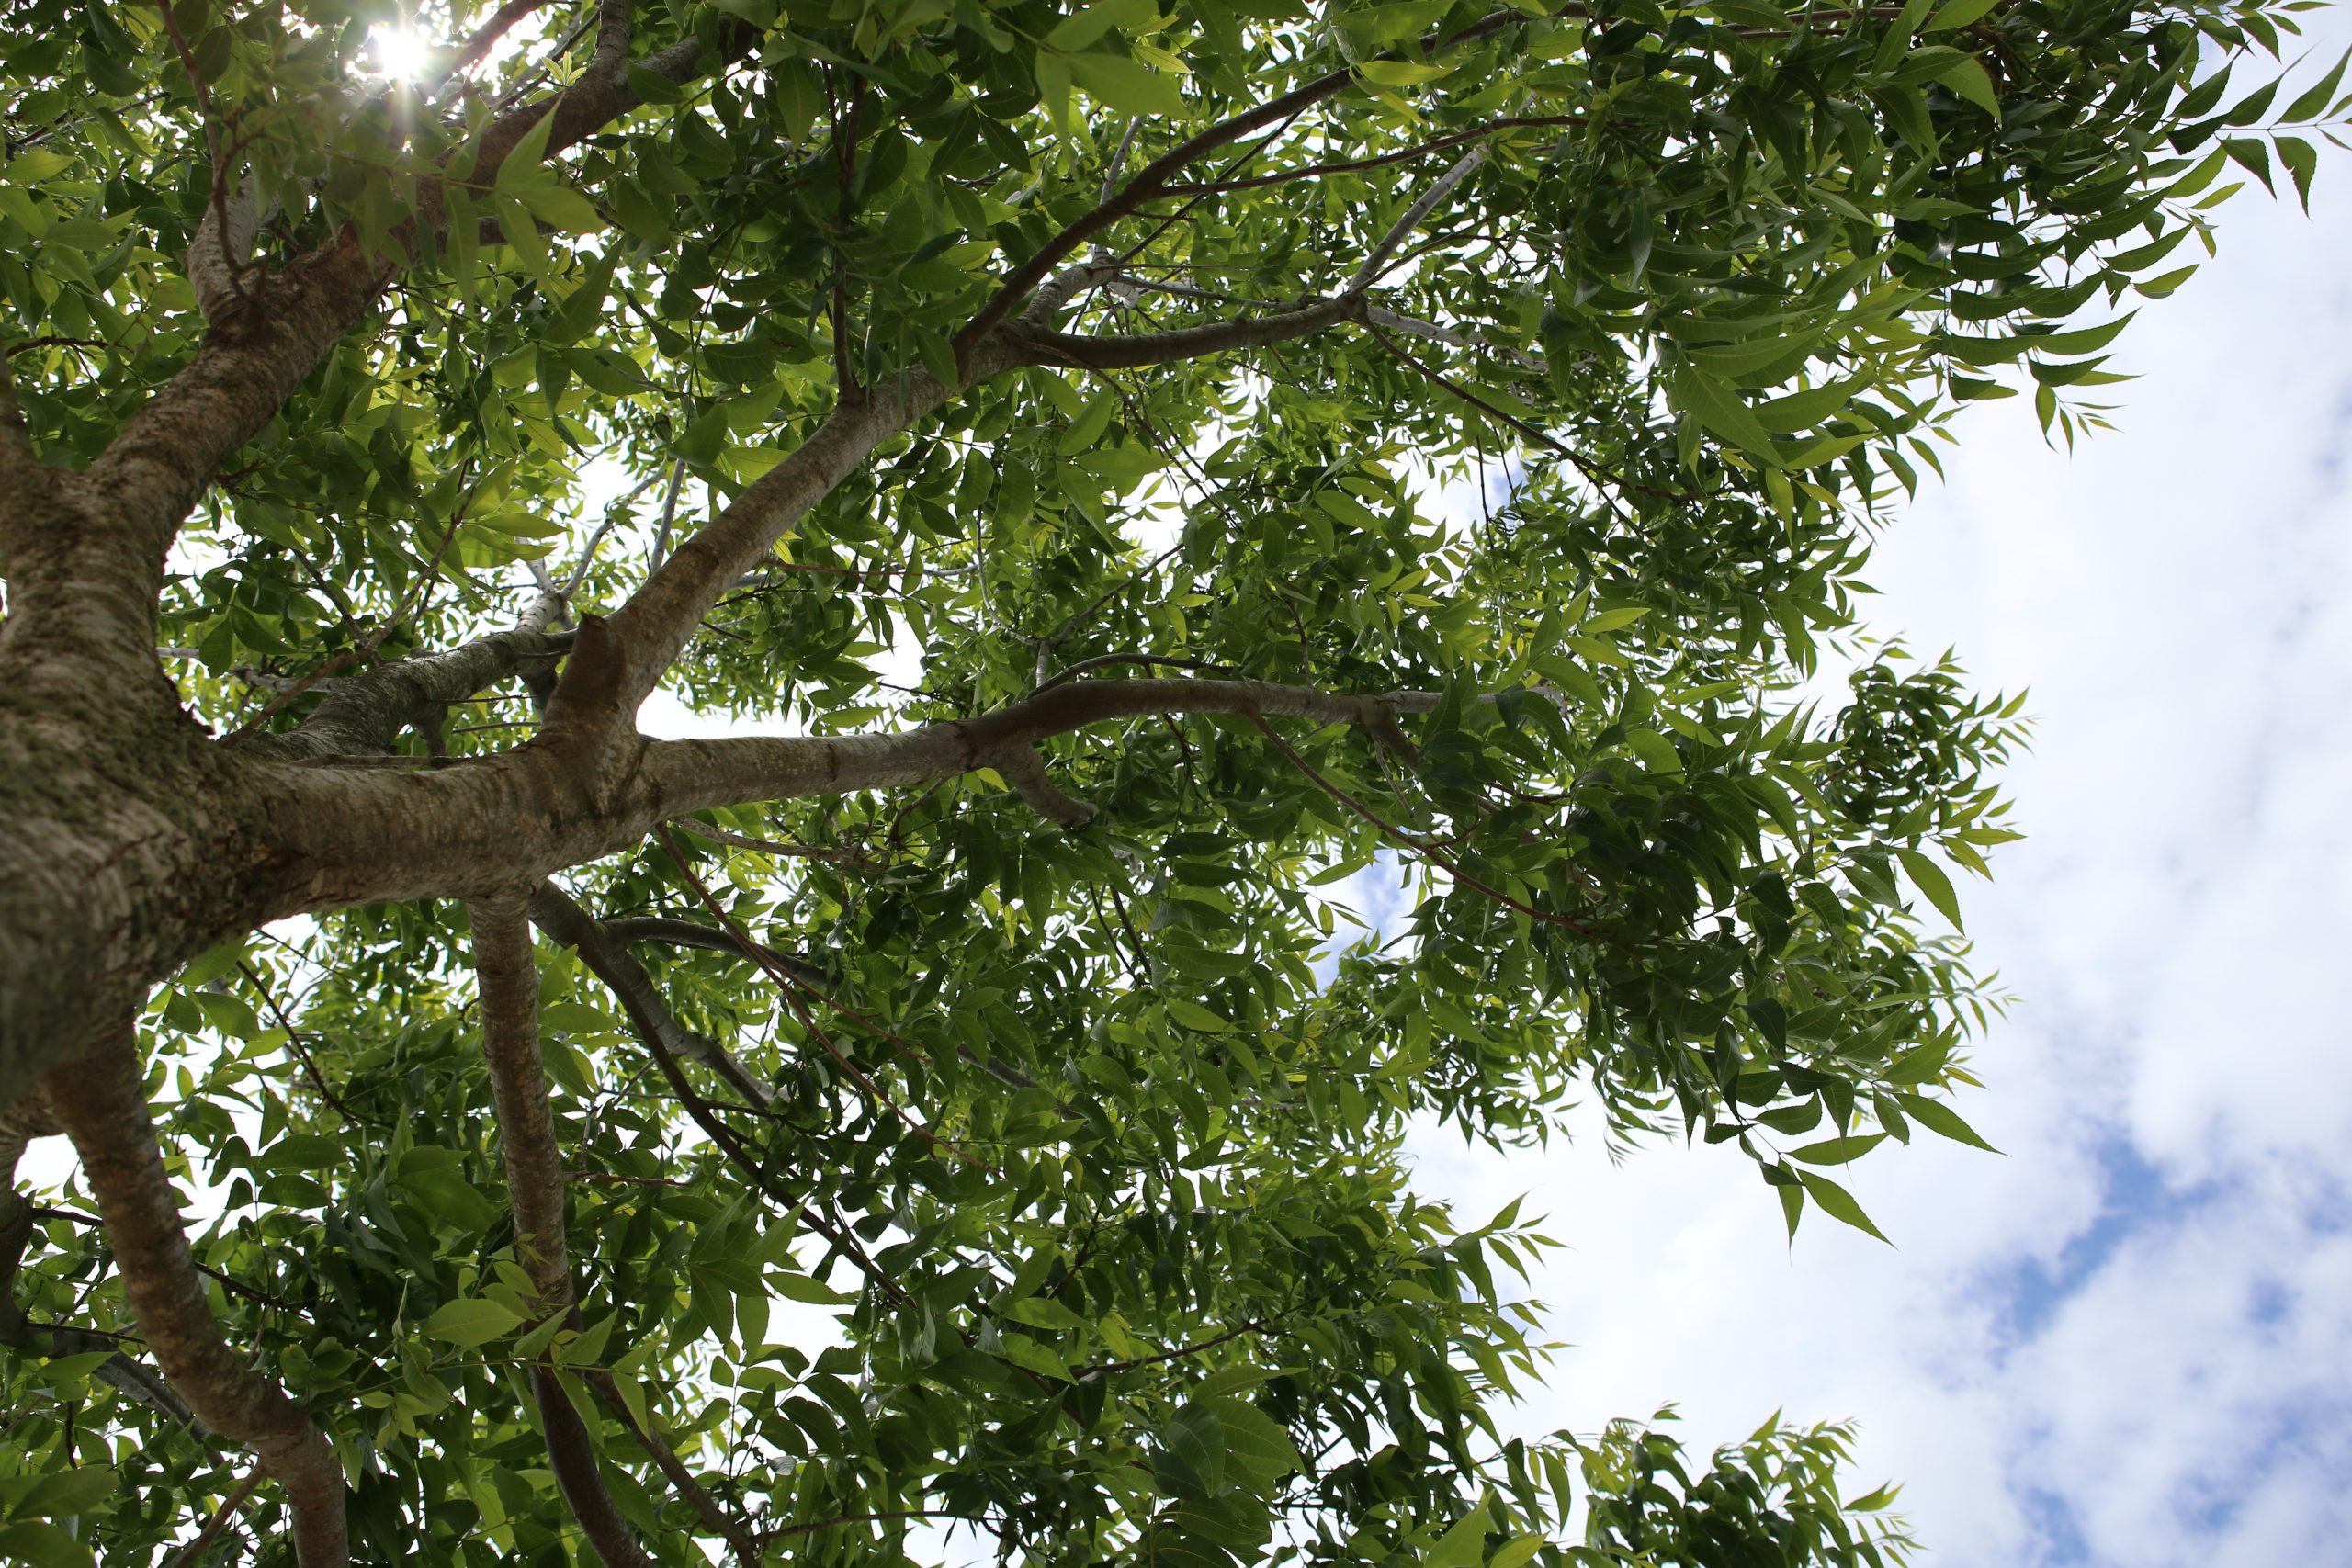 A large pecan tree at Camp David Pecans, a small pecan orchard in Millican, Texas. The perspective is from looking up into the canopy while standing next to the trunk of the tree. Sunlight filters through the dark green leaves and the bark is a light, woody brown. Beyond the full canopy is a bright, cloudy sky.